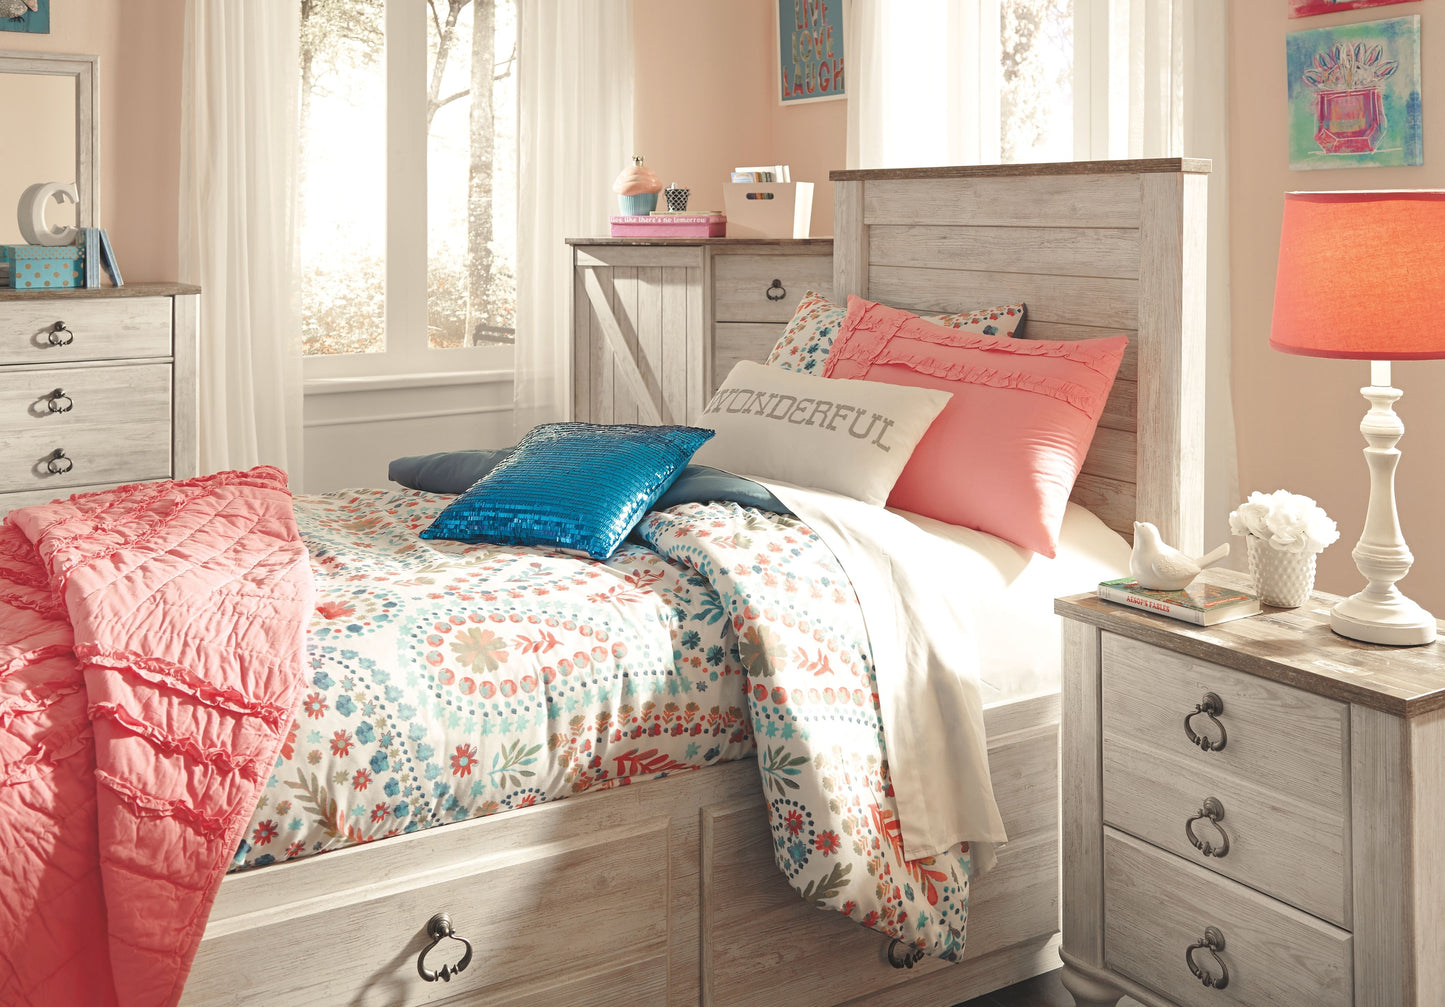 Willowton - Panel Bed